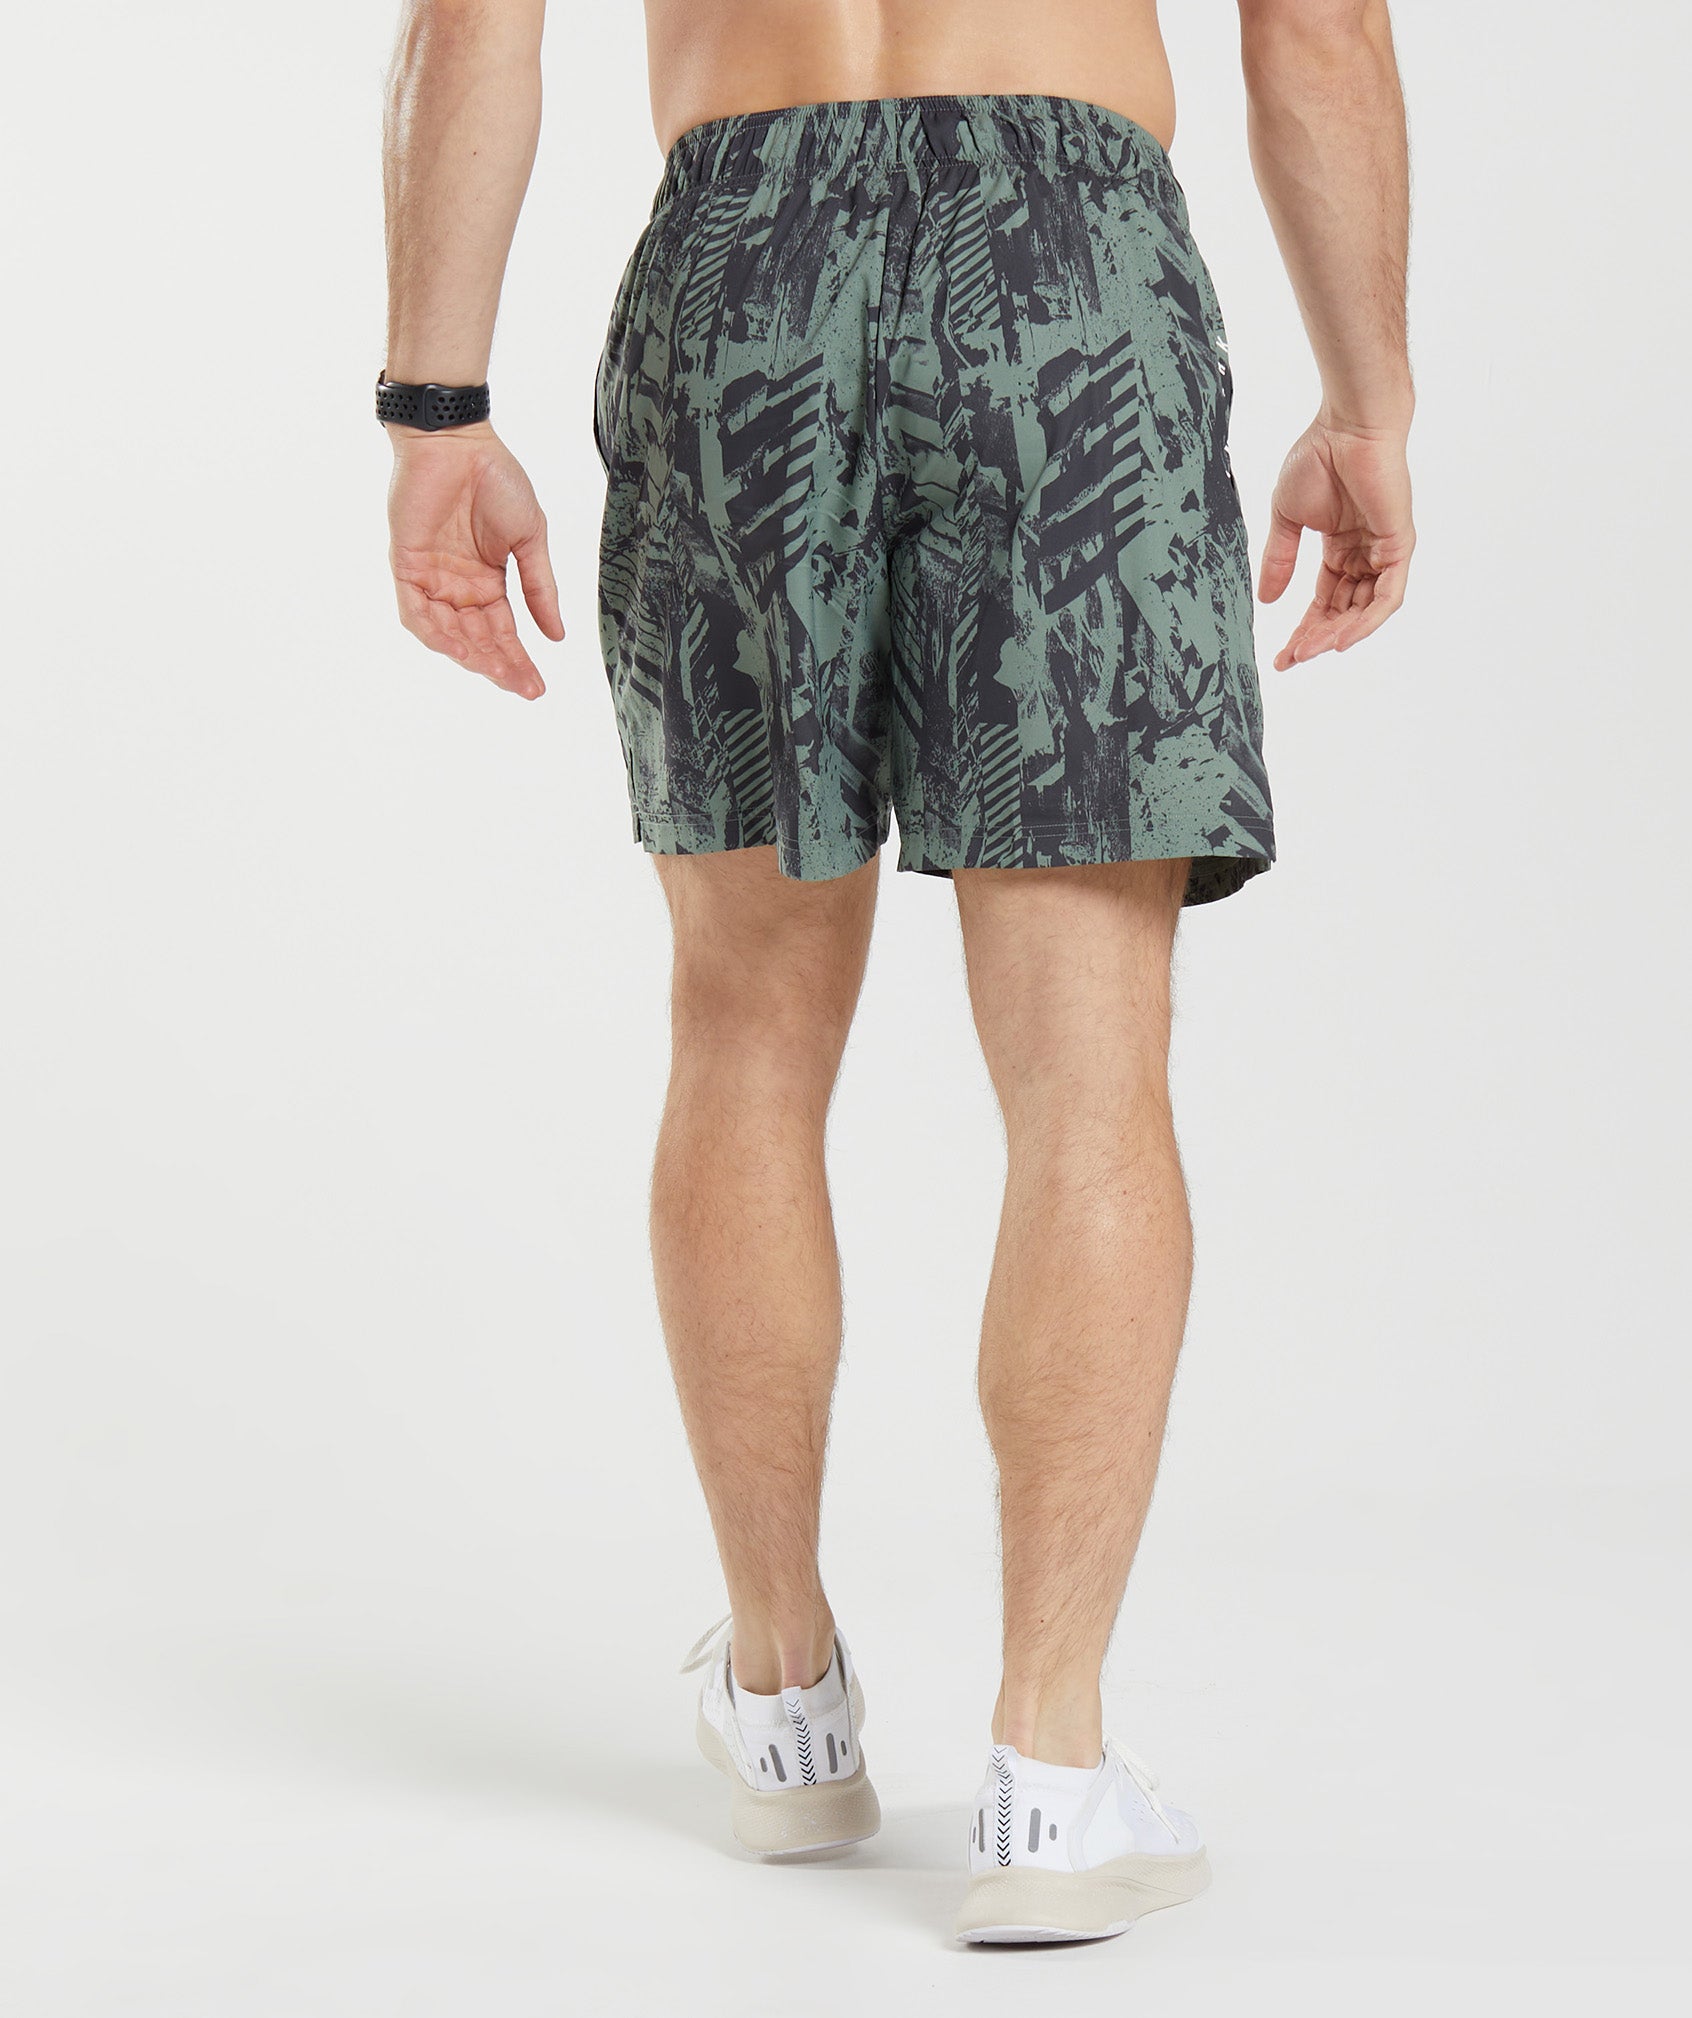 Sport 7" Shorts in Willow Green Print - view 2